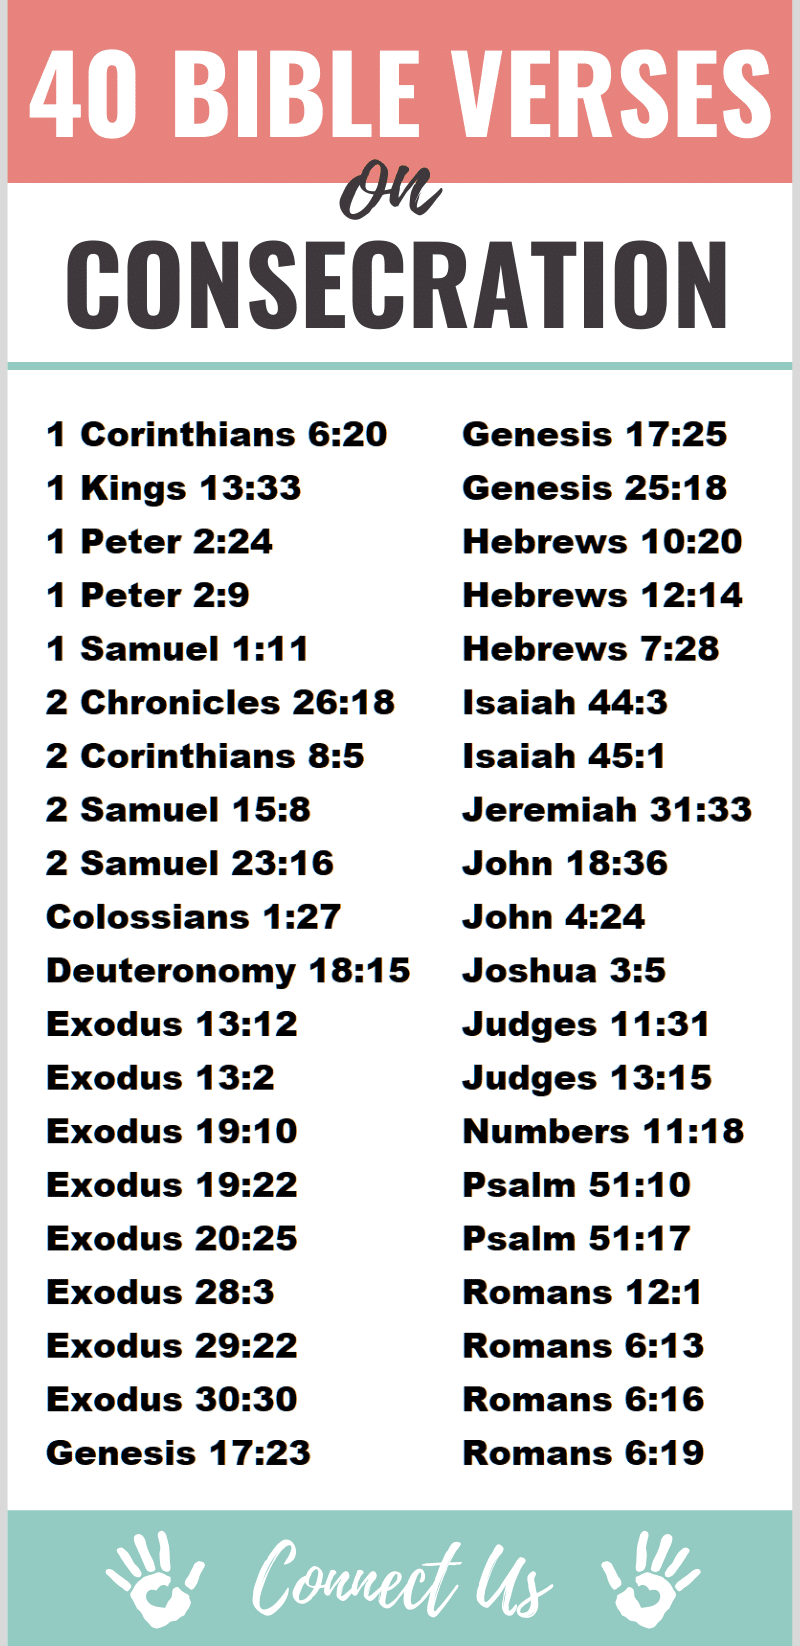 Bible Verses on Consecration